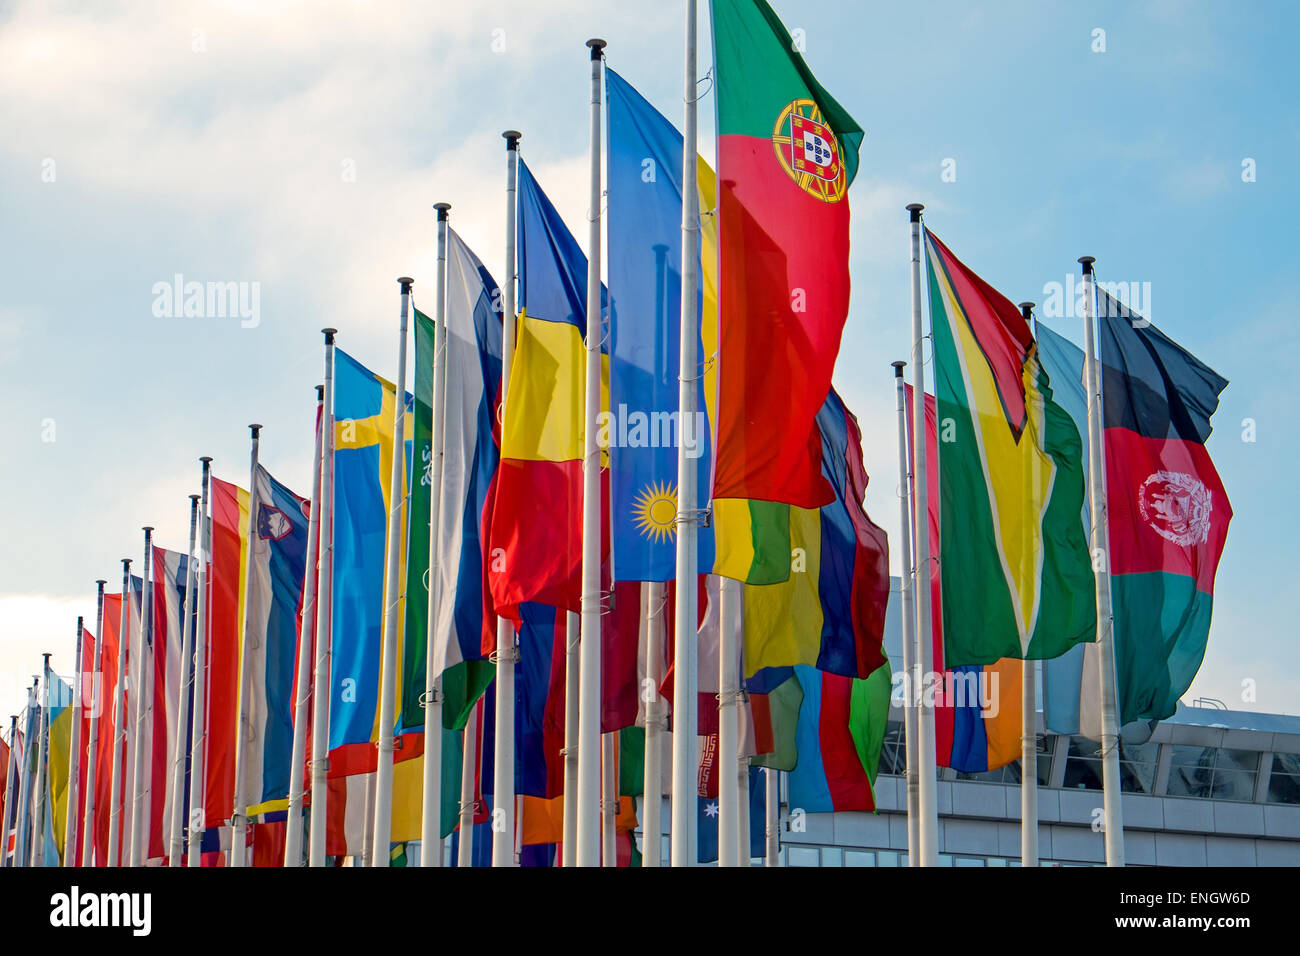 Many different international flags seen at a fair center Stock Photo